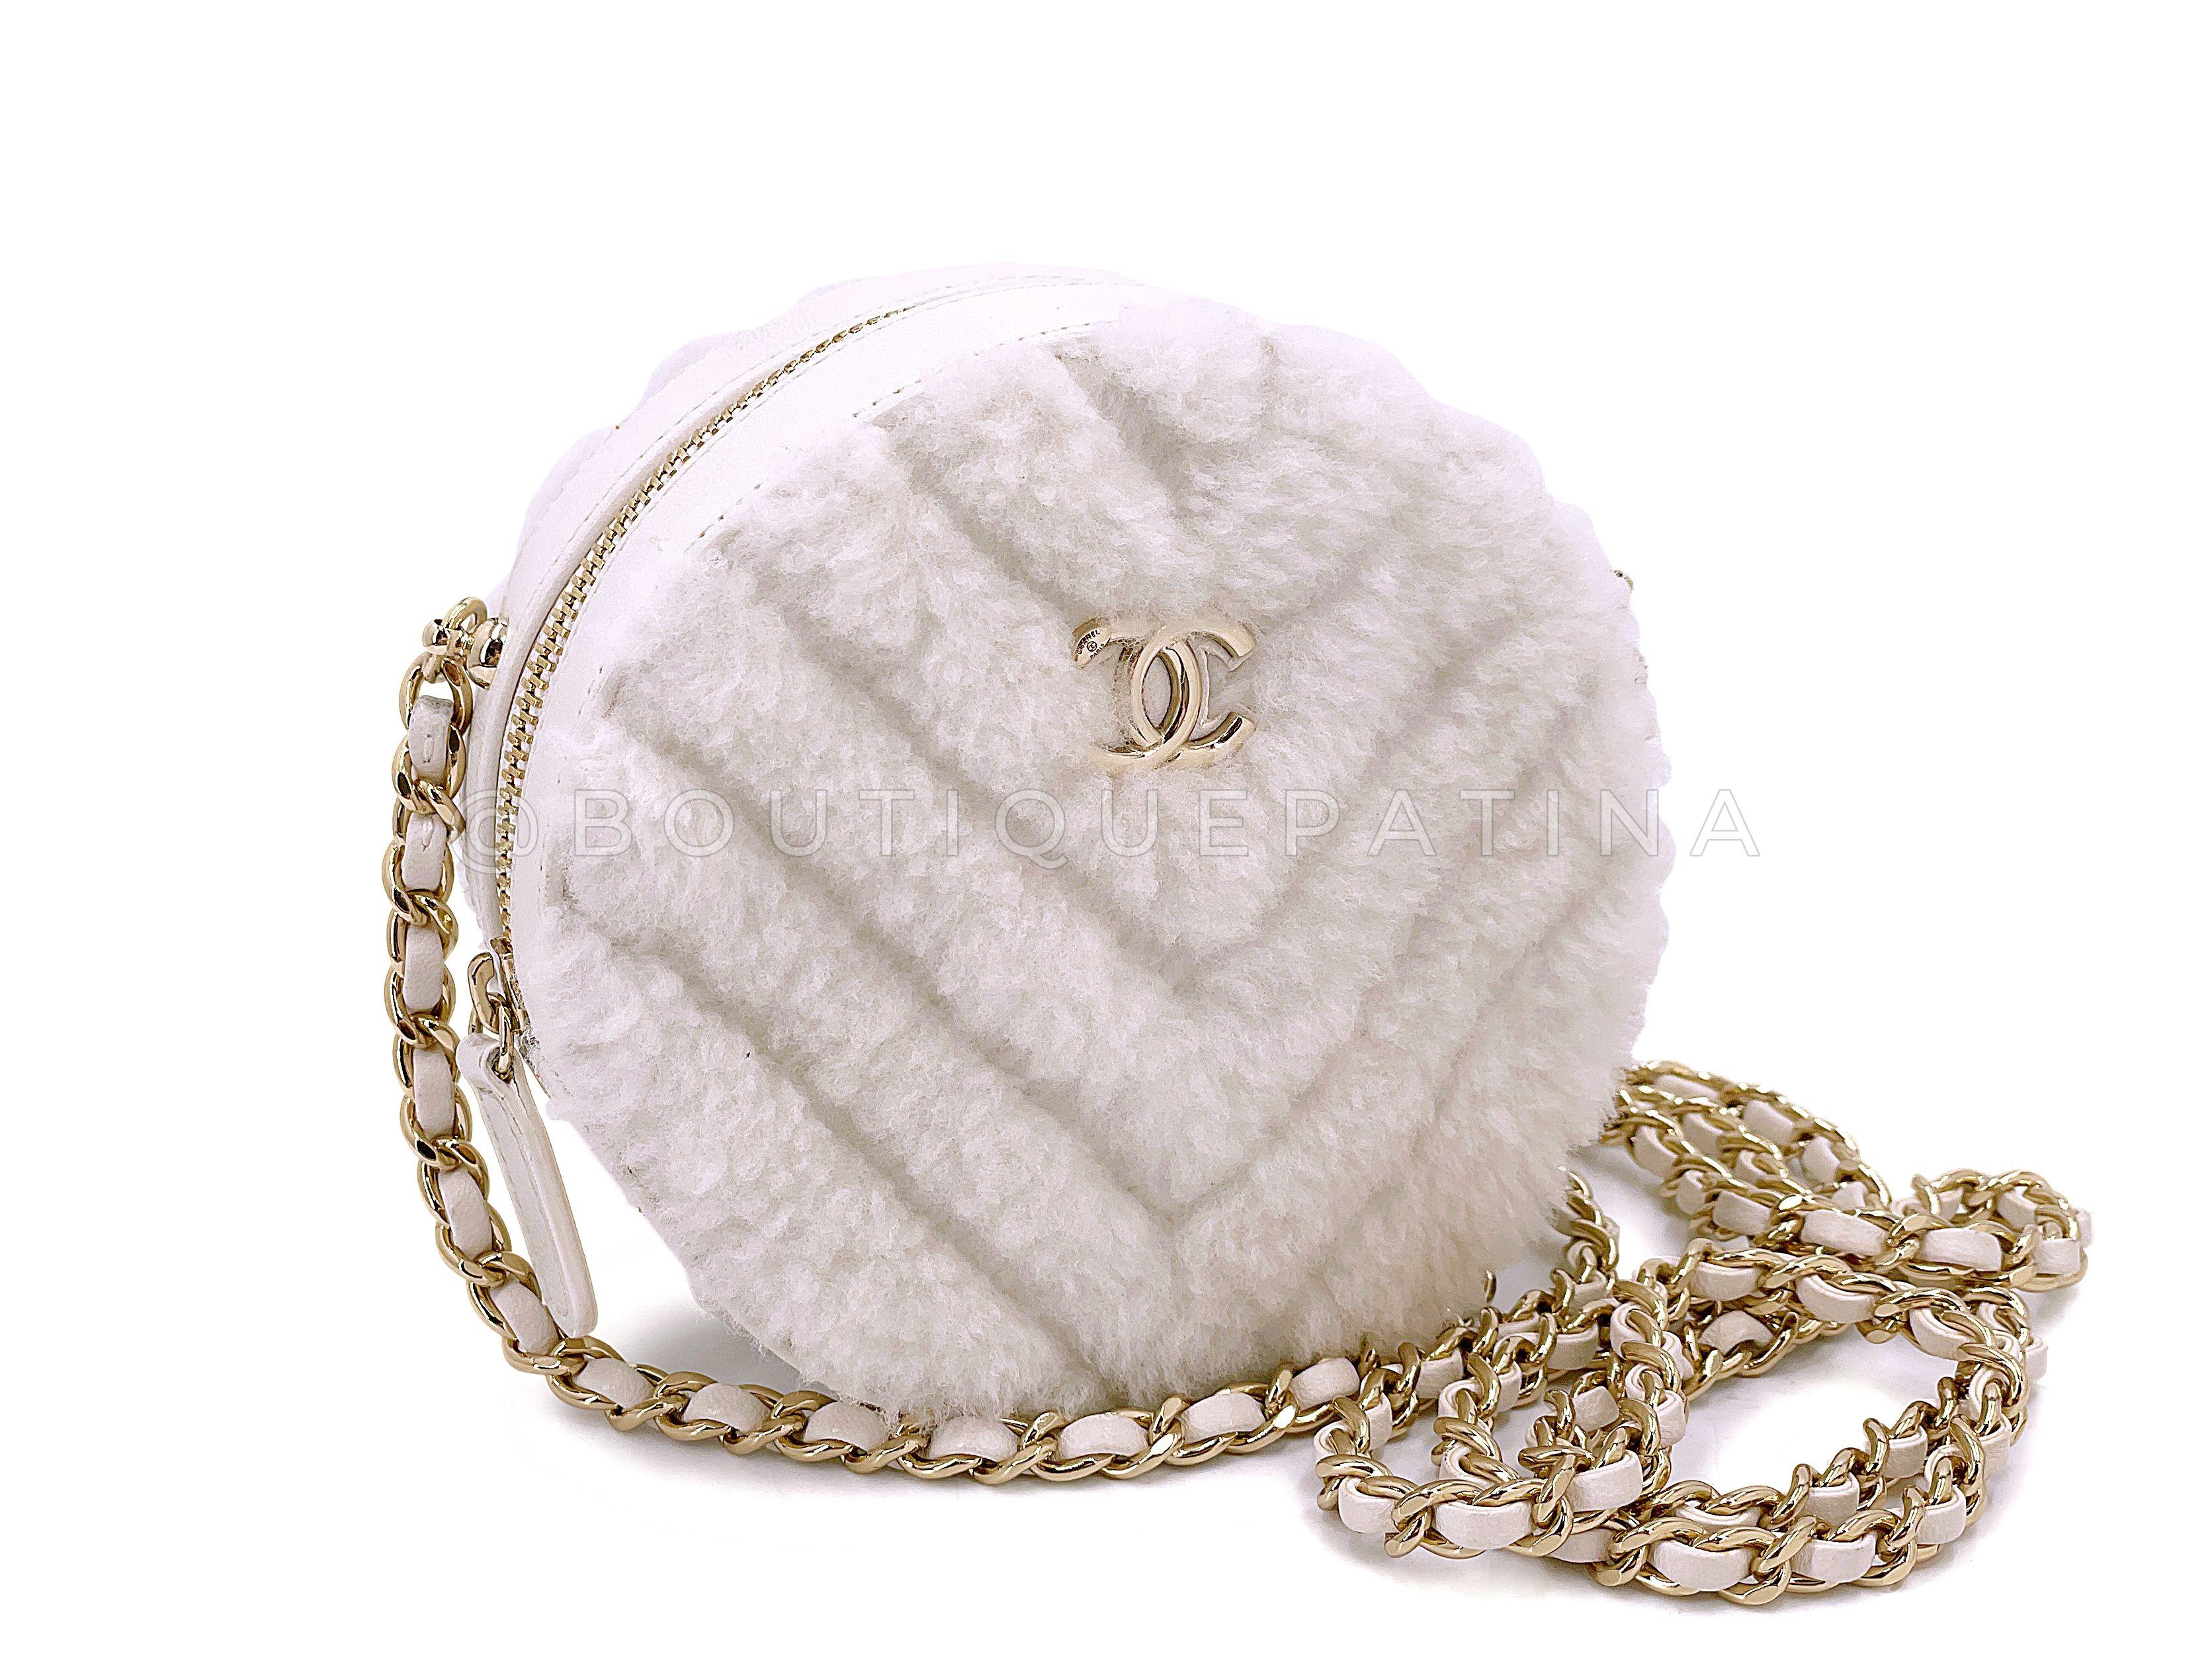 Store item: 67850
ITEM is a cute and whimsical addition with crossbody use. 

Zip top and compartment will carry coins and cards, no phone. 

In white ivory shearling and gold hardware.  For 20 years, Boutique Patina has specialized in sourcing and